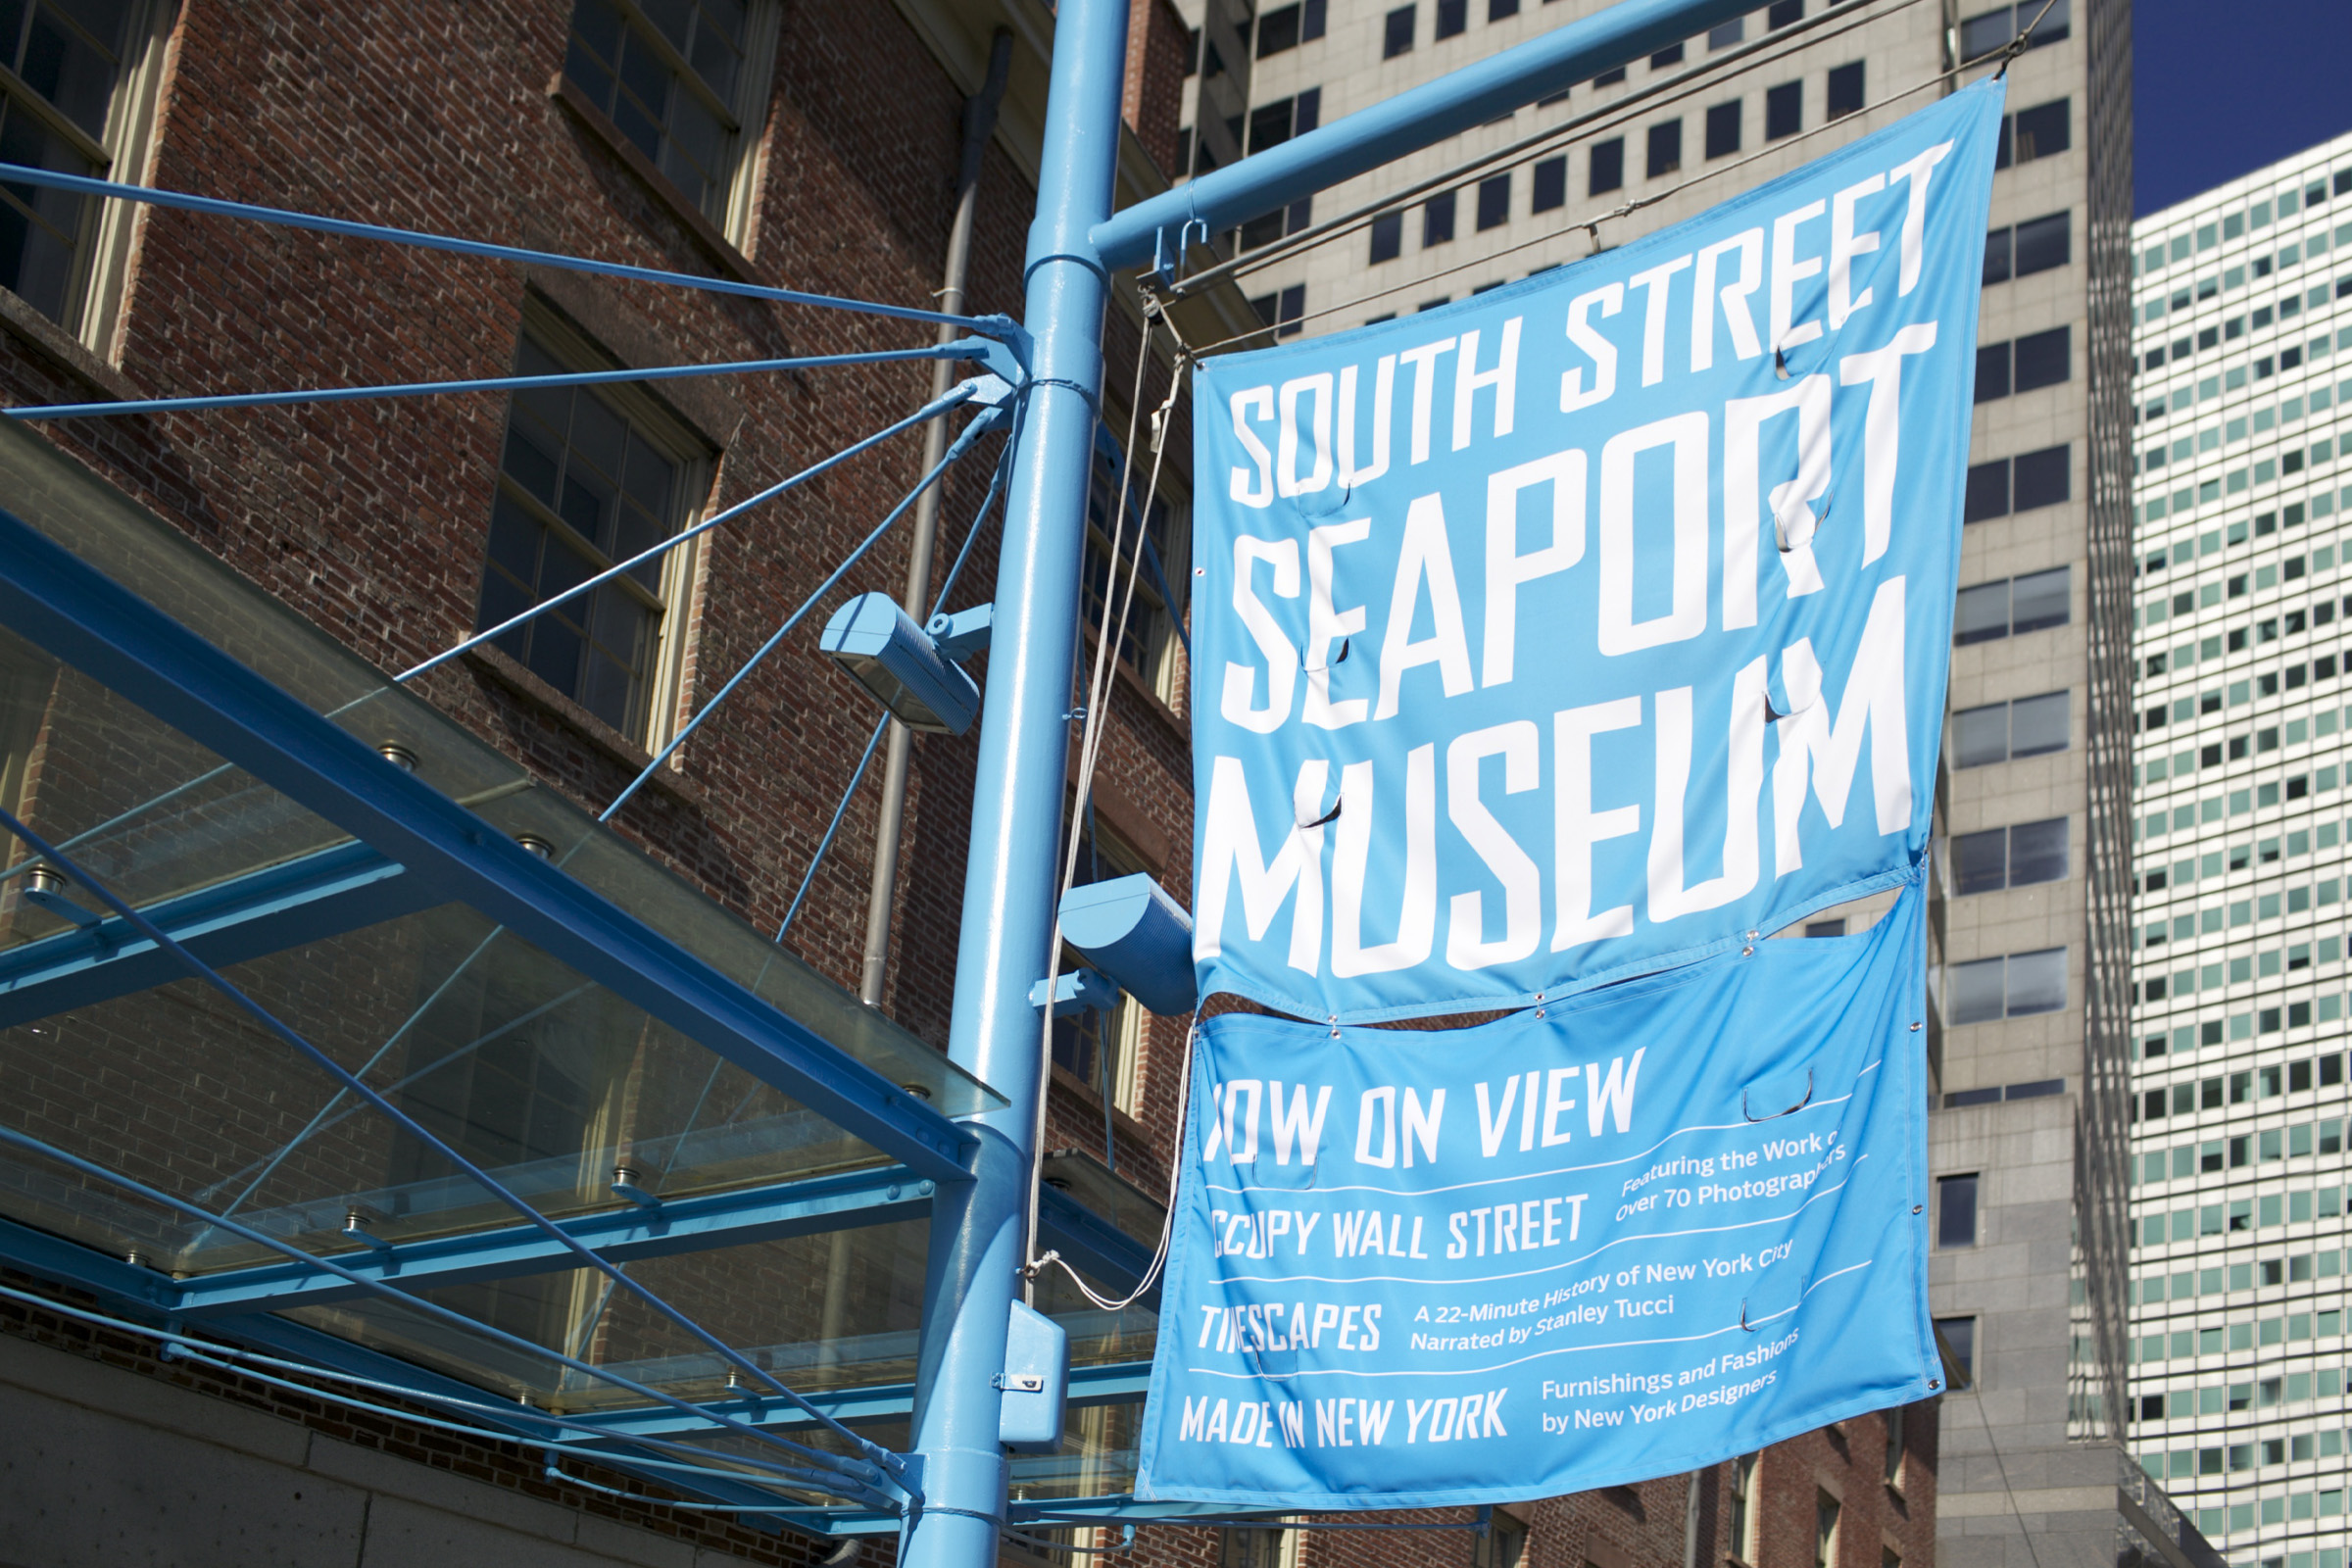 South Street Seaport Museum Reopening